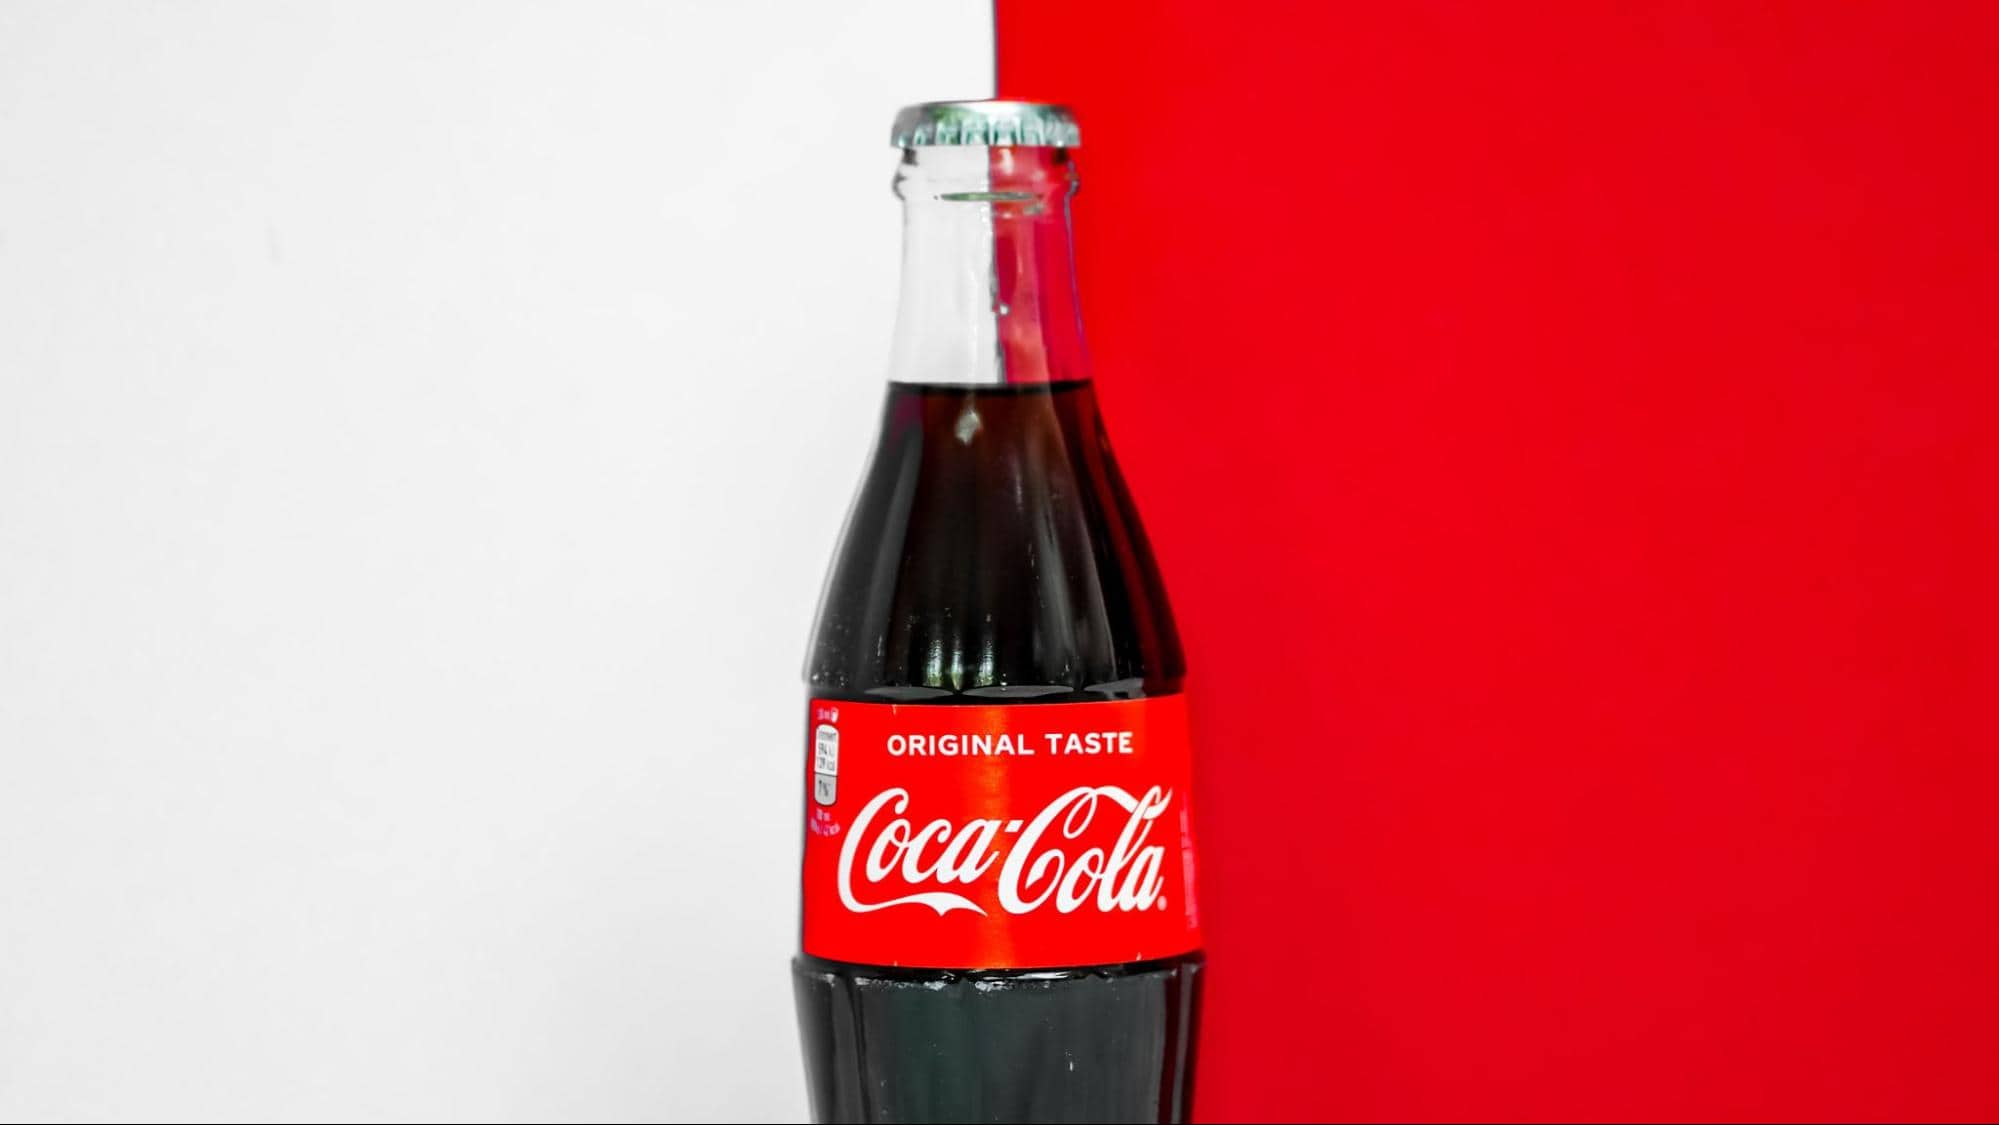 Stormous Ransomware Gang Claims to Have Hacked Coca-Cola